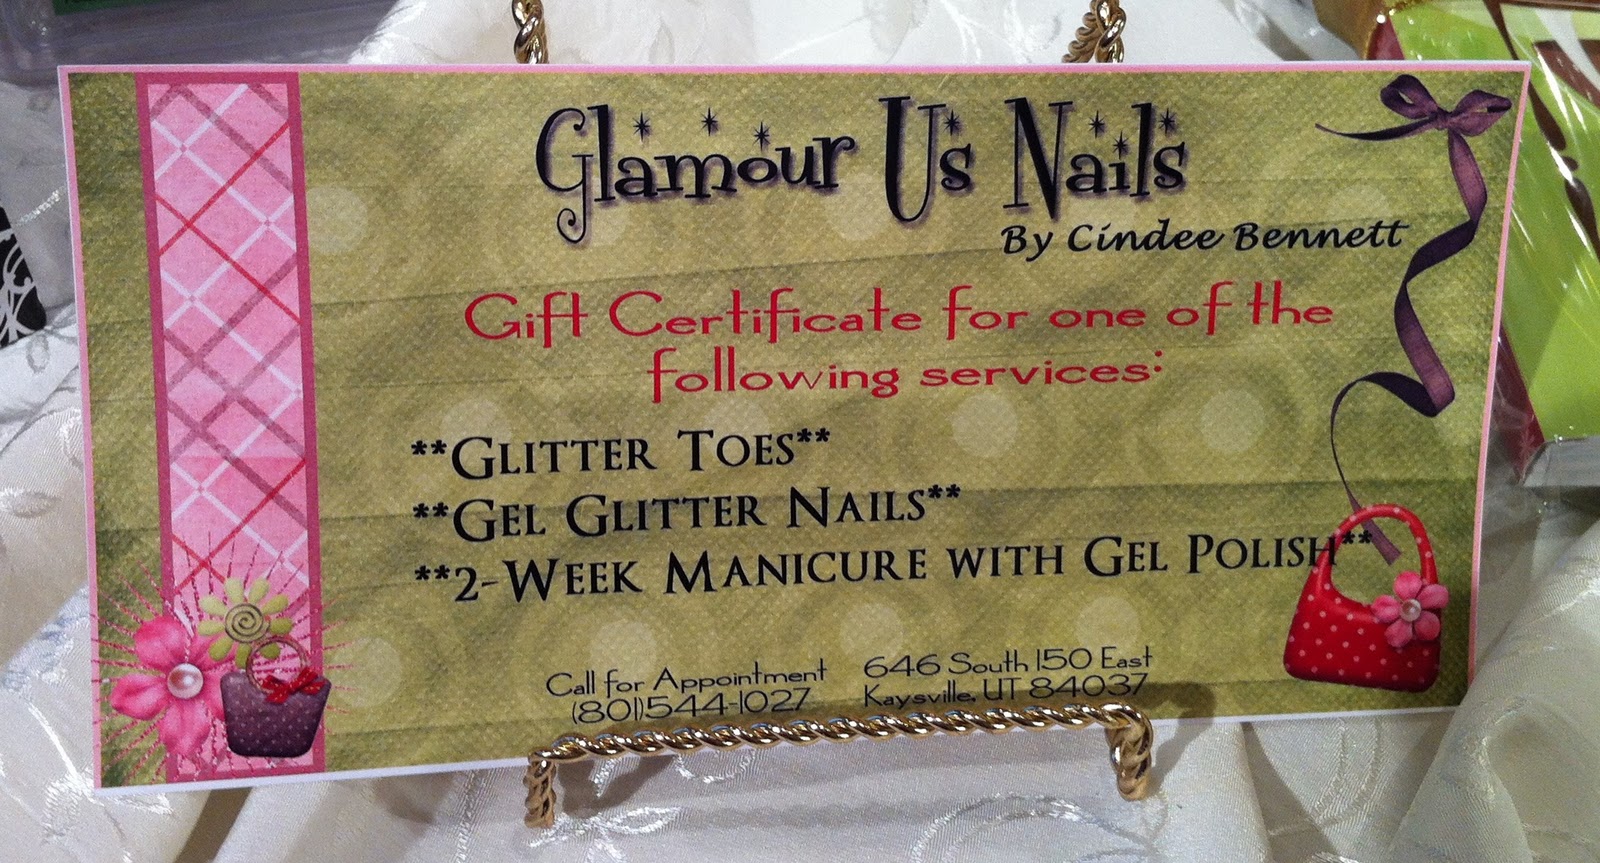 Glamour Us Nails by Cindee Bennett. Gift Certificate for your choice of: